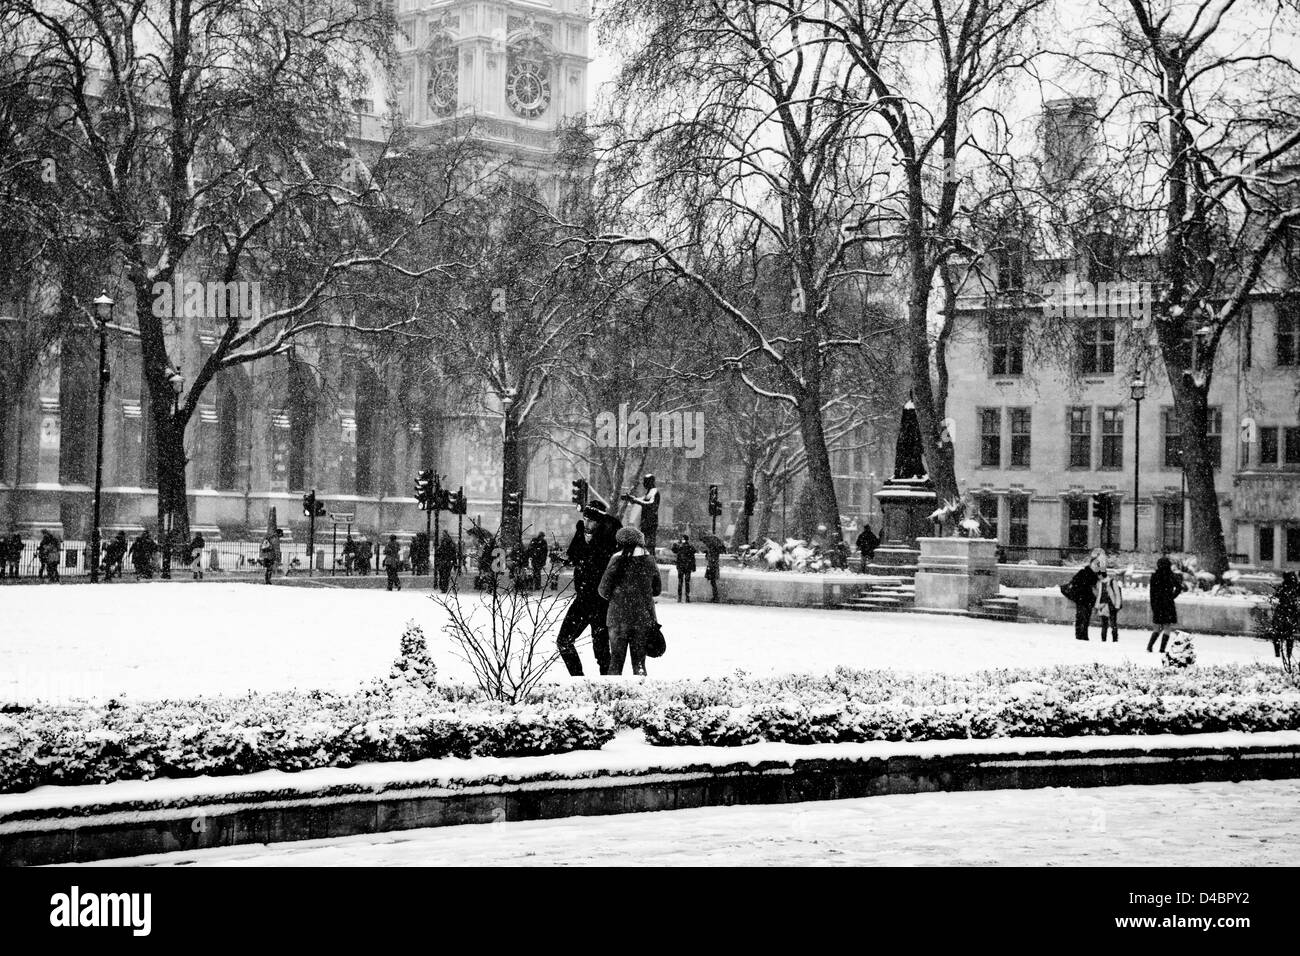 Snow on street in london Black and White Stock Photos & Images - Alamy